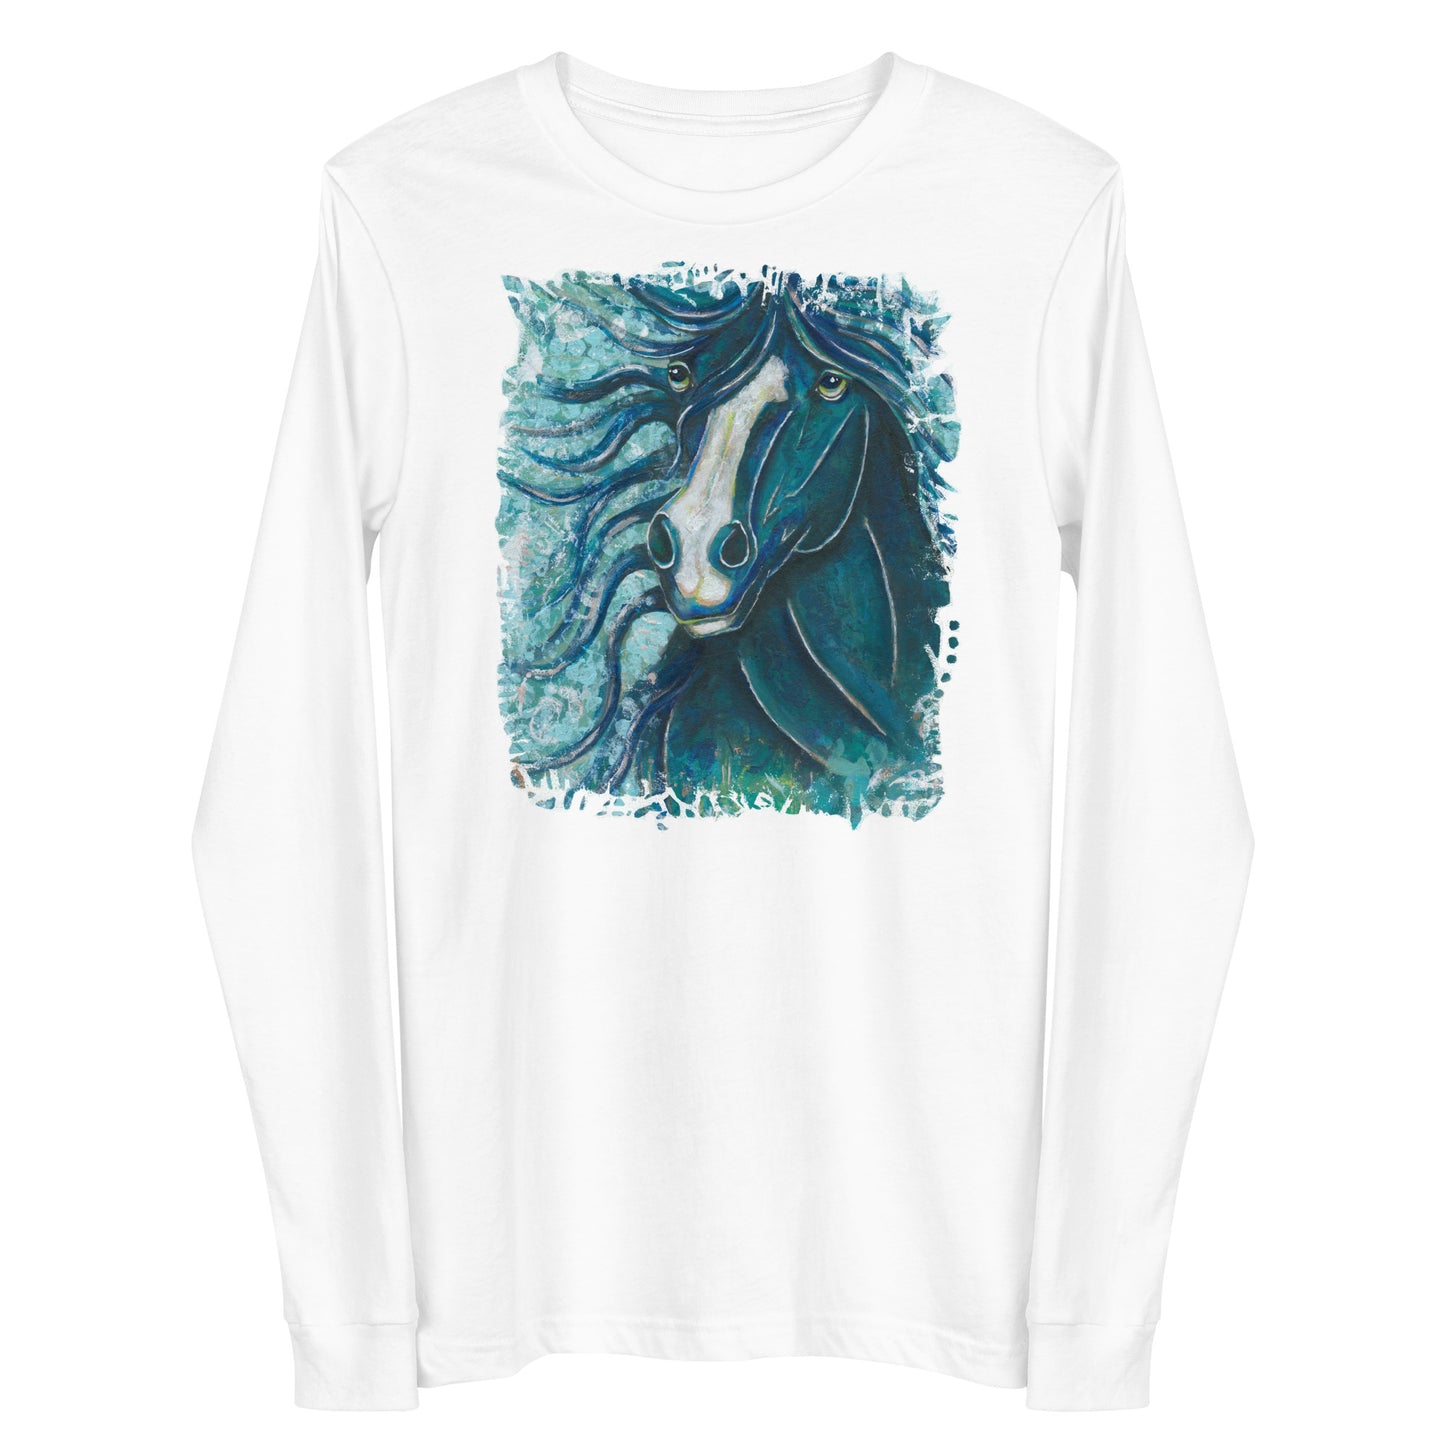 "Dark Teal and Turquoise Horse" Unisex Long Sleeve Tee